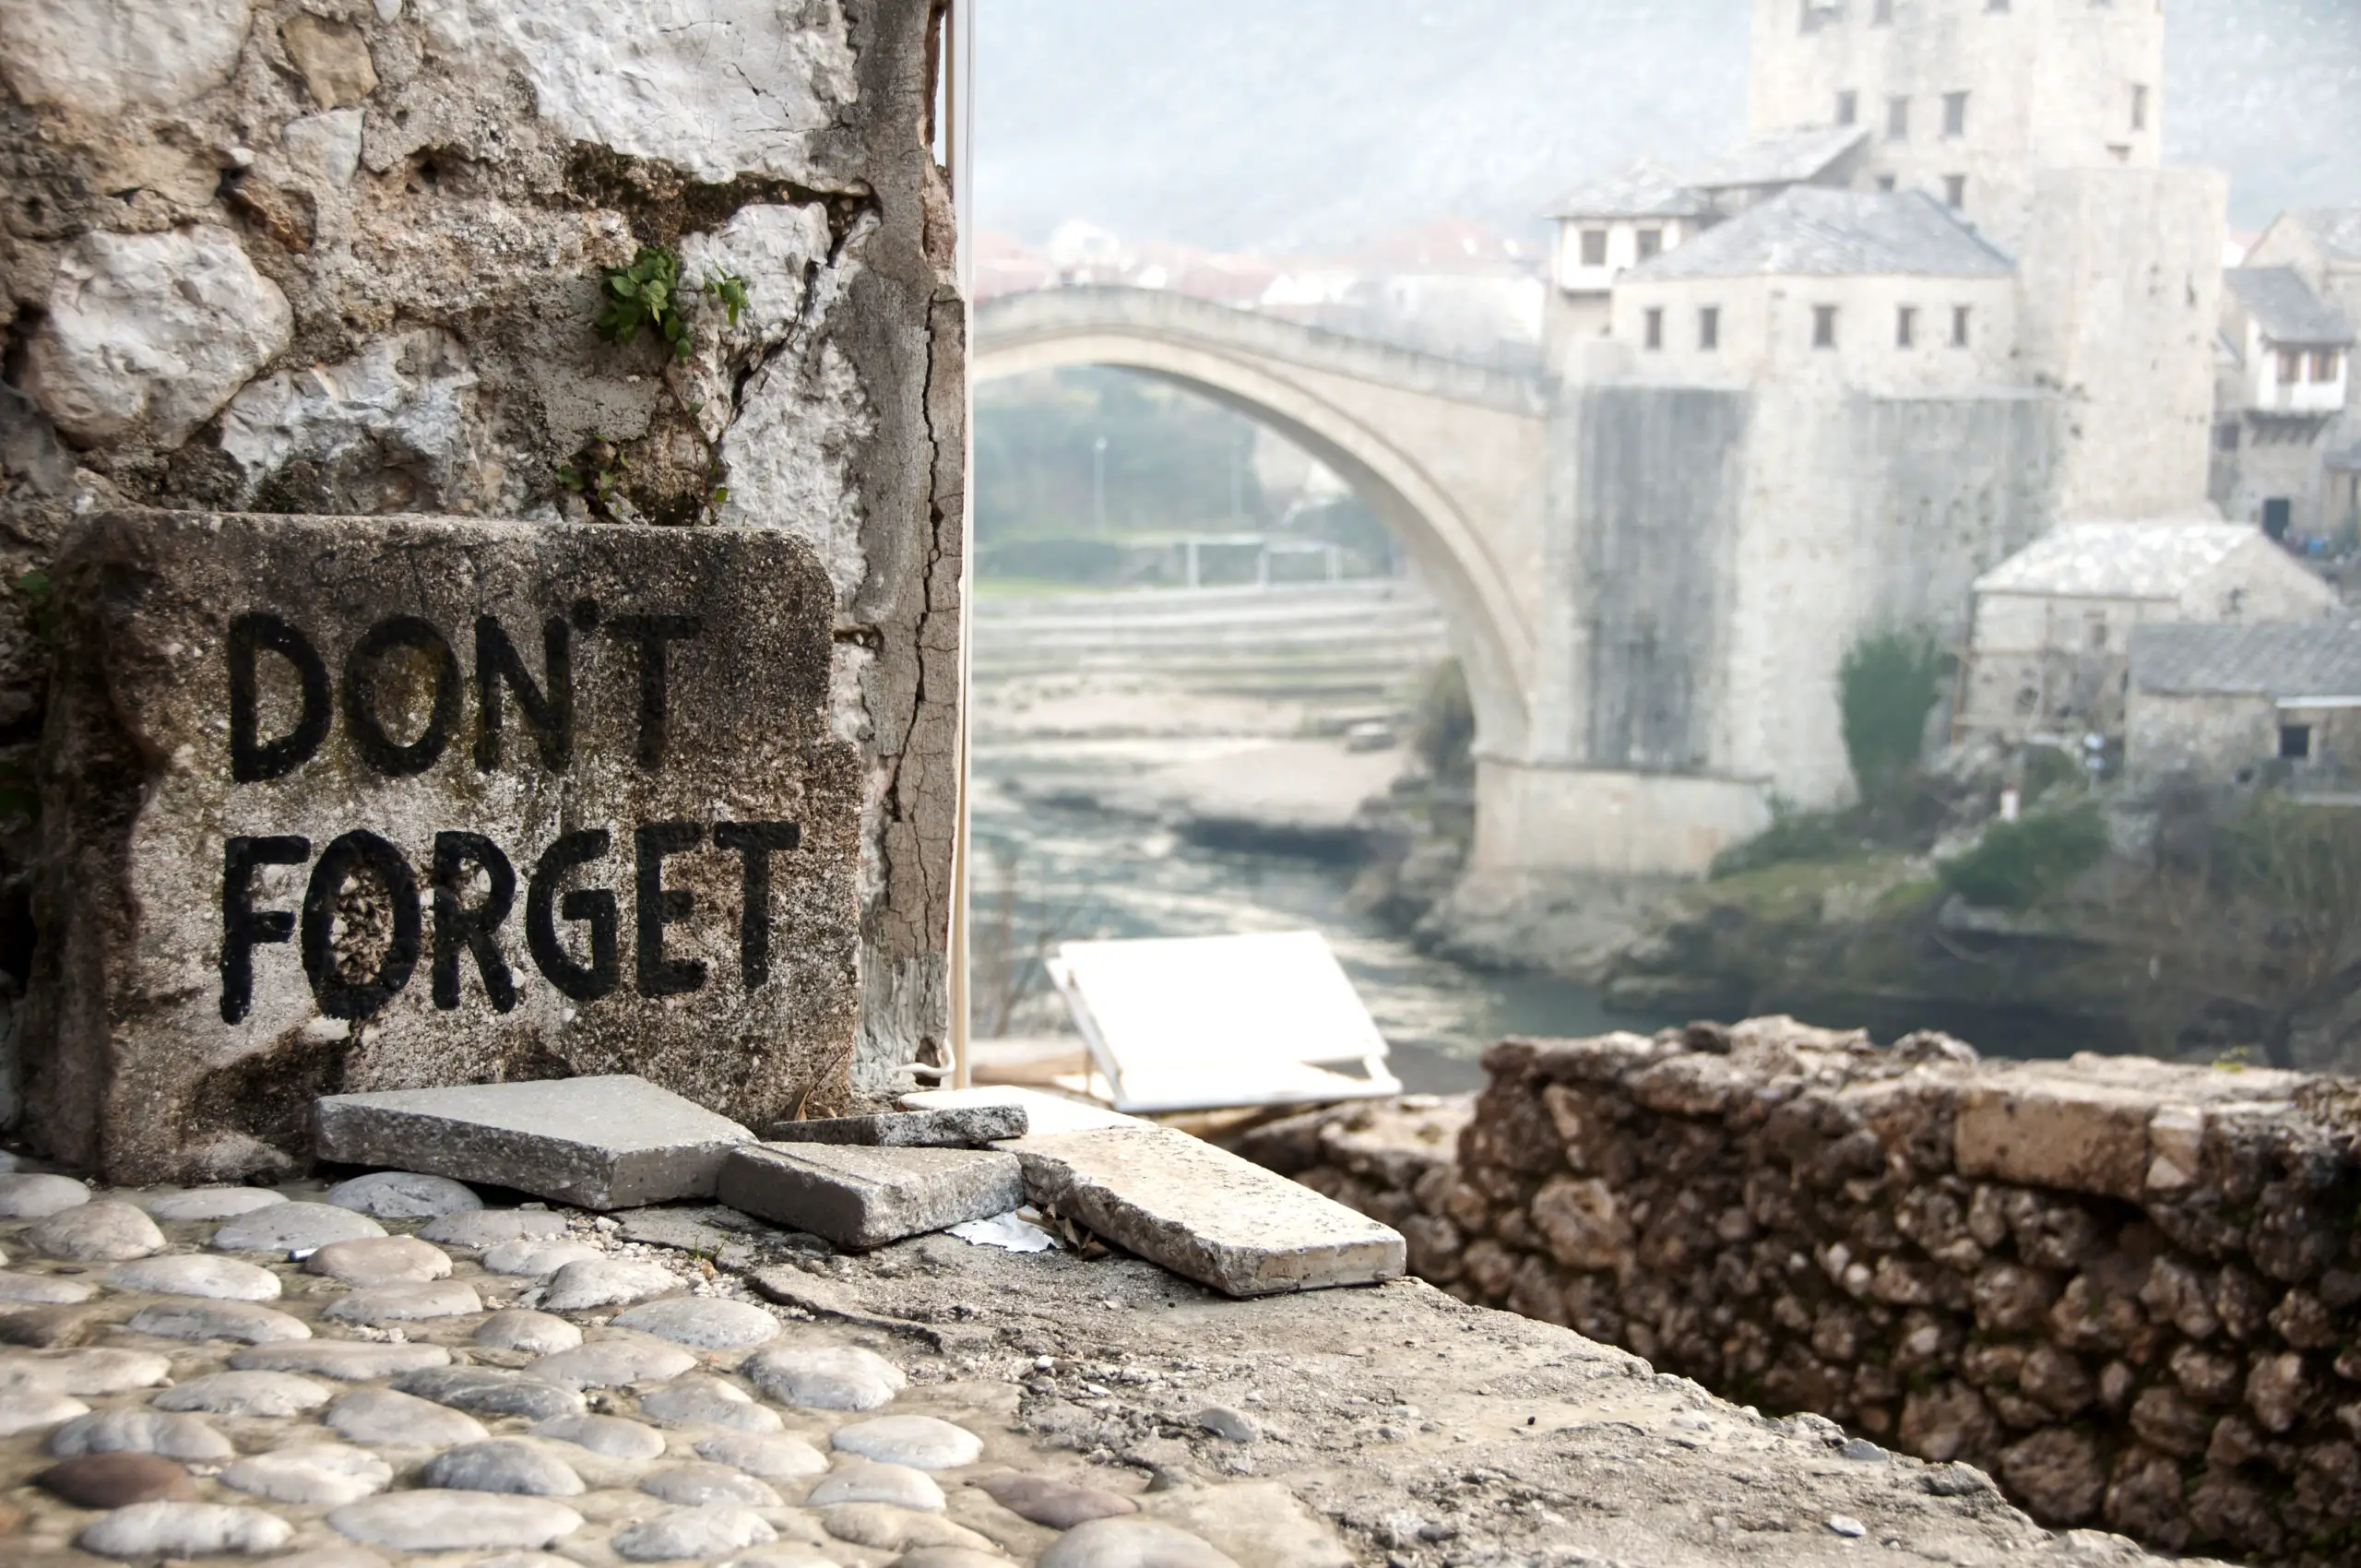 The ancient bridge in Mostar in Bosnia was blown up during the war.